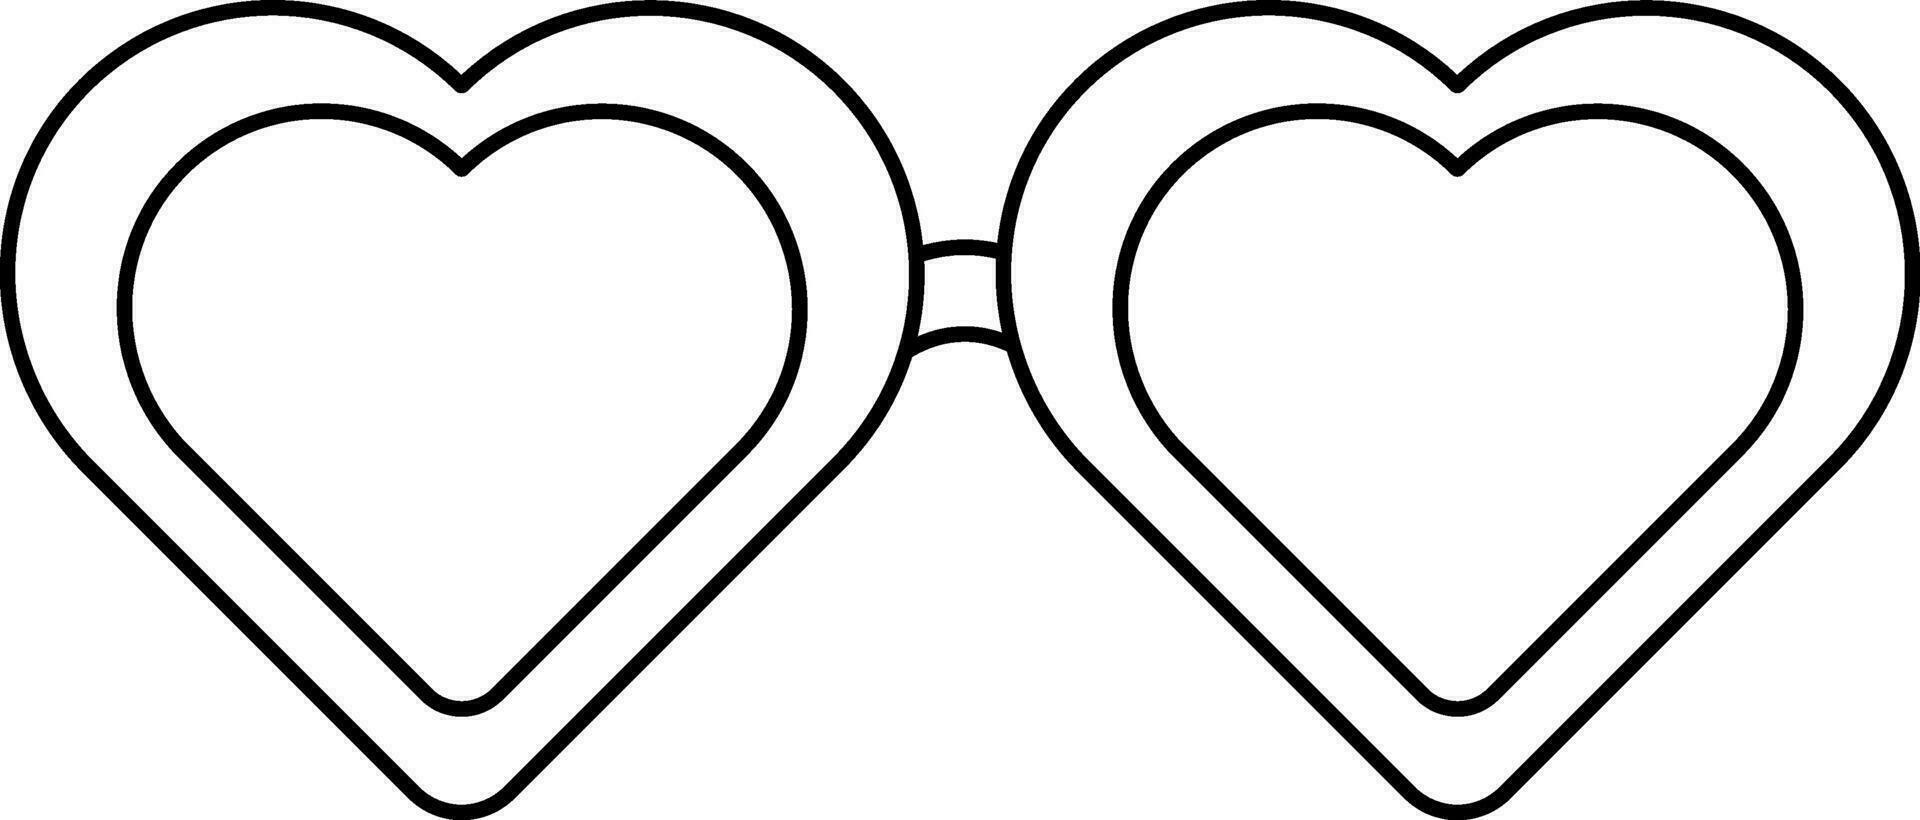 Thin Contour Line Of Heart Shaped Romantic Glasses vector